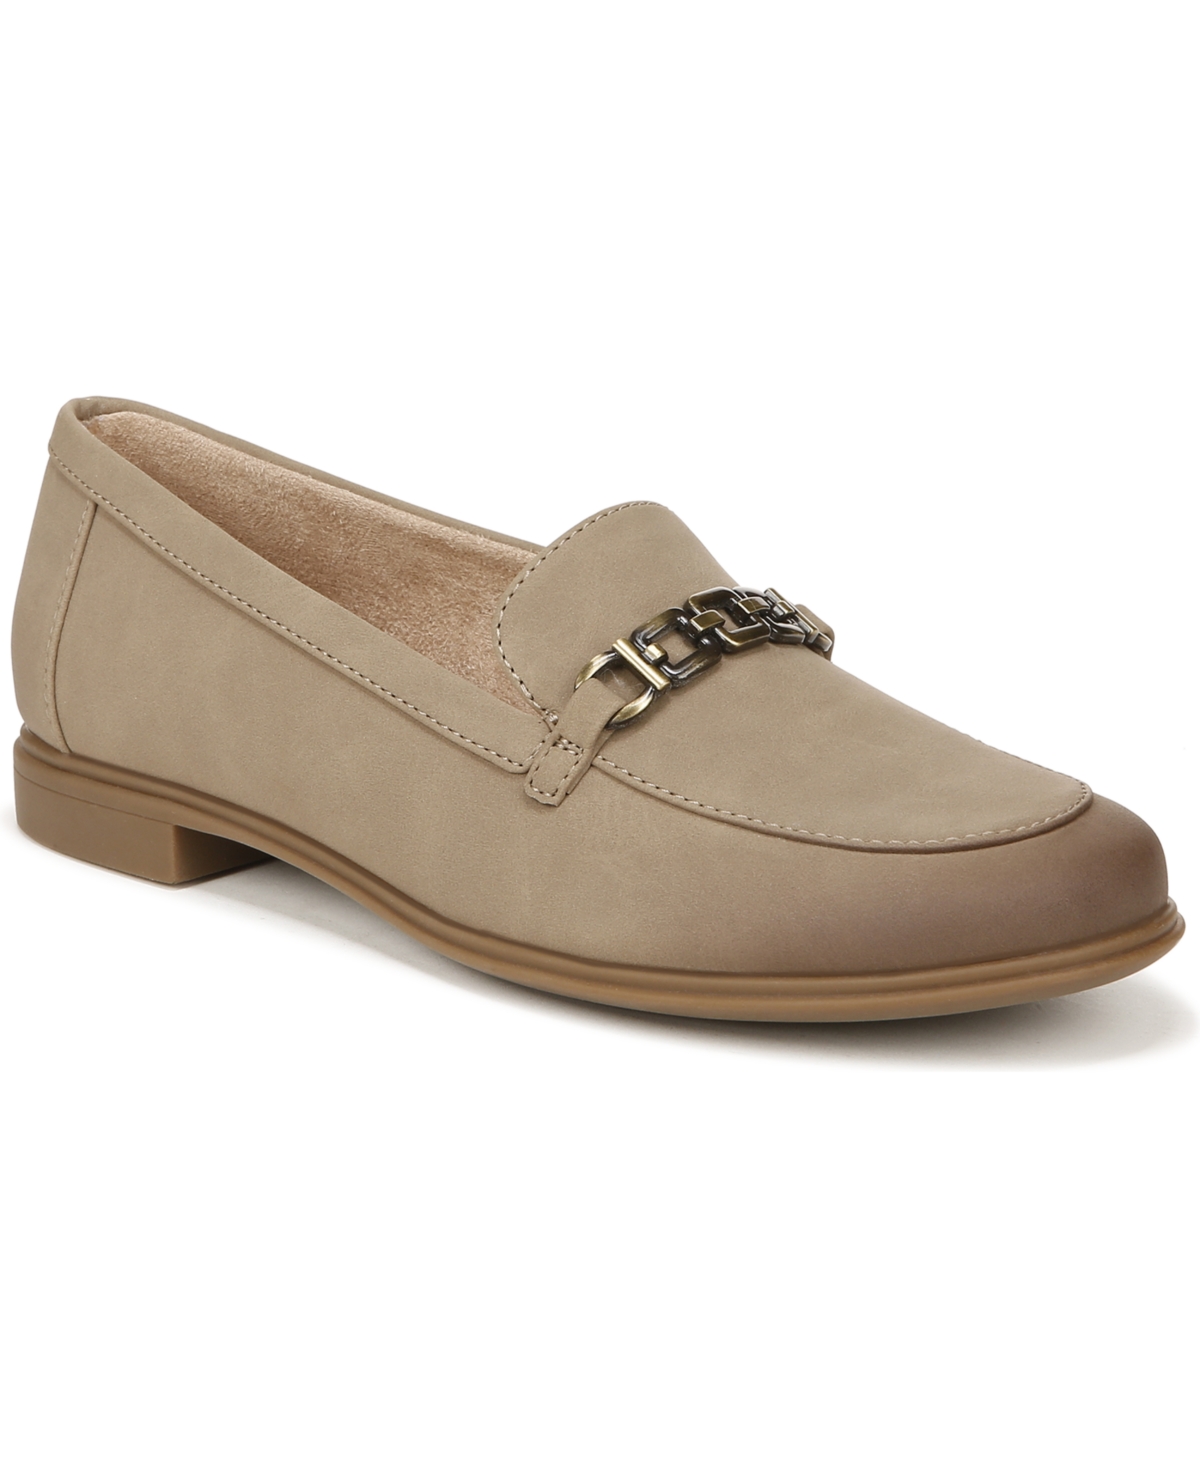 Lydia Loafers - Coffee Bean Brown Faux Leather